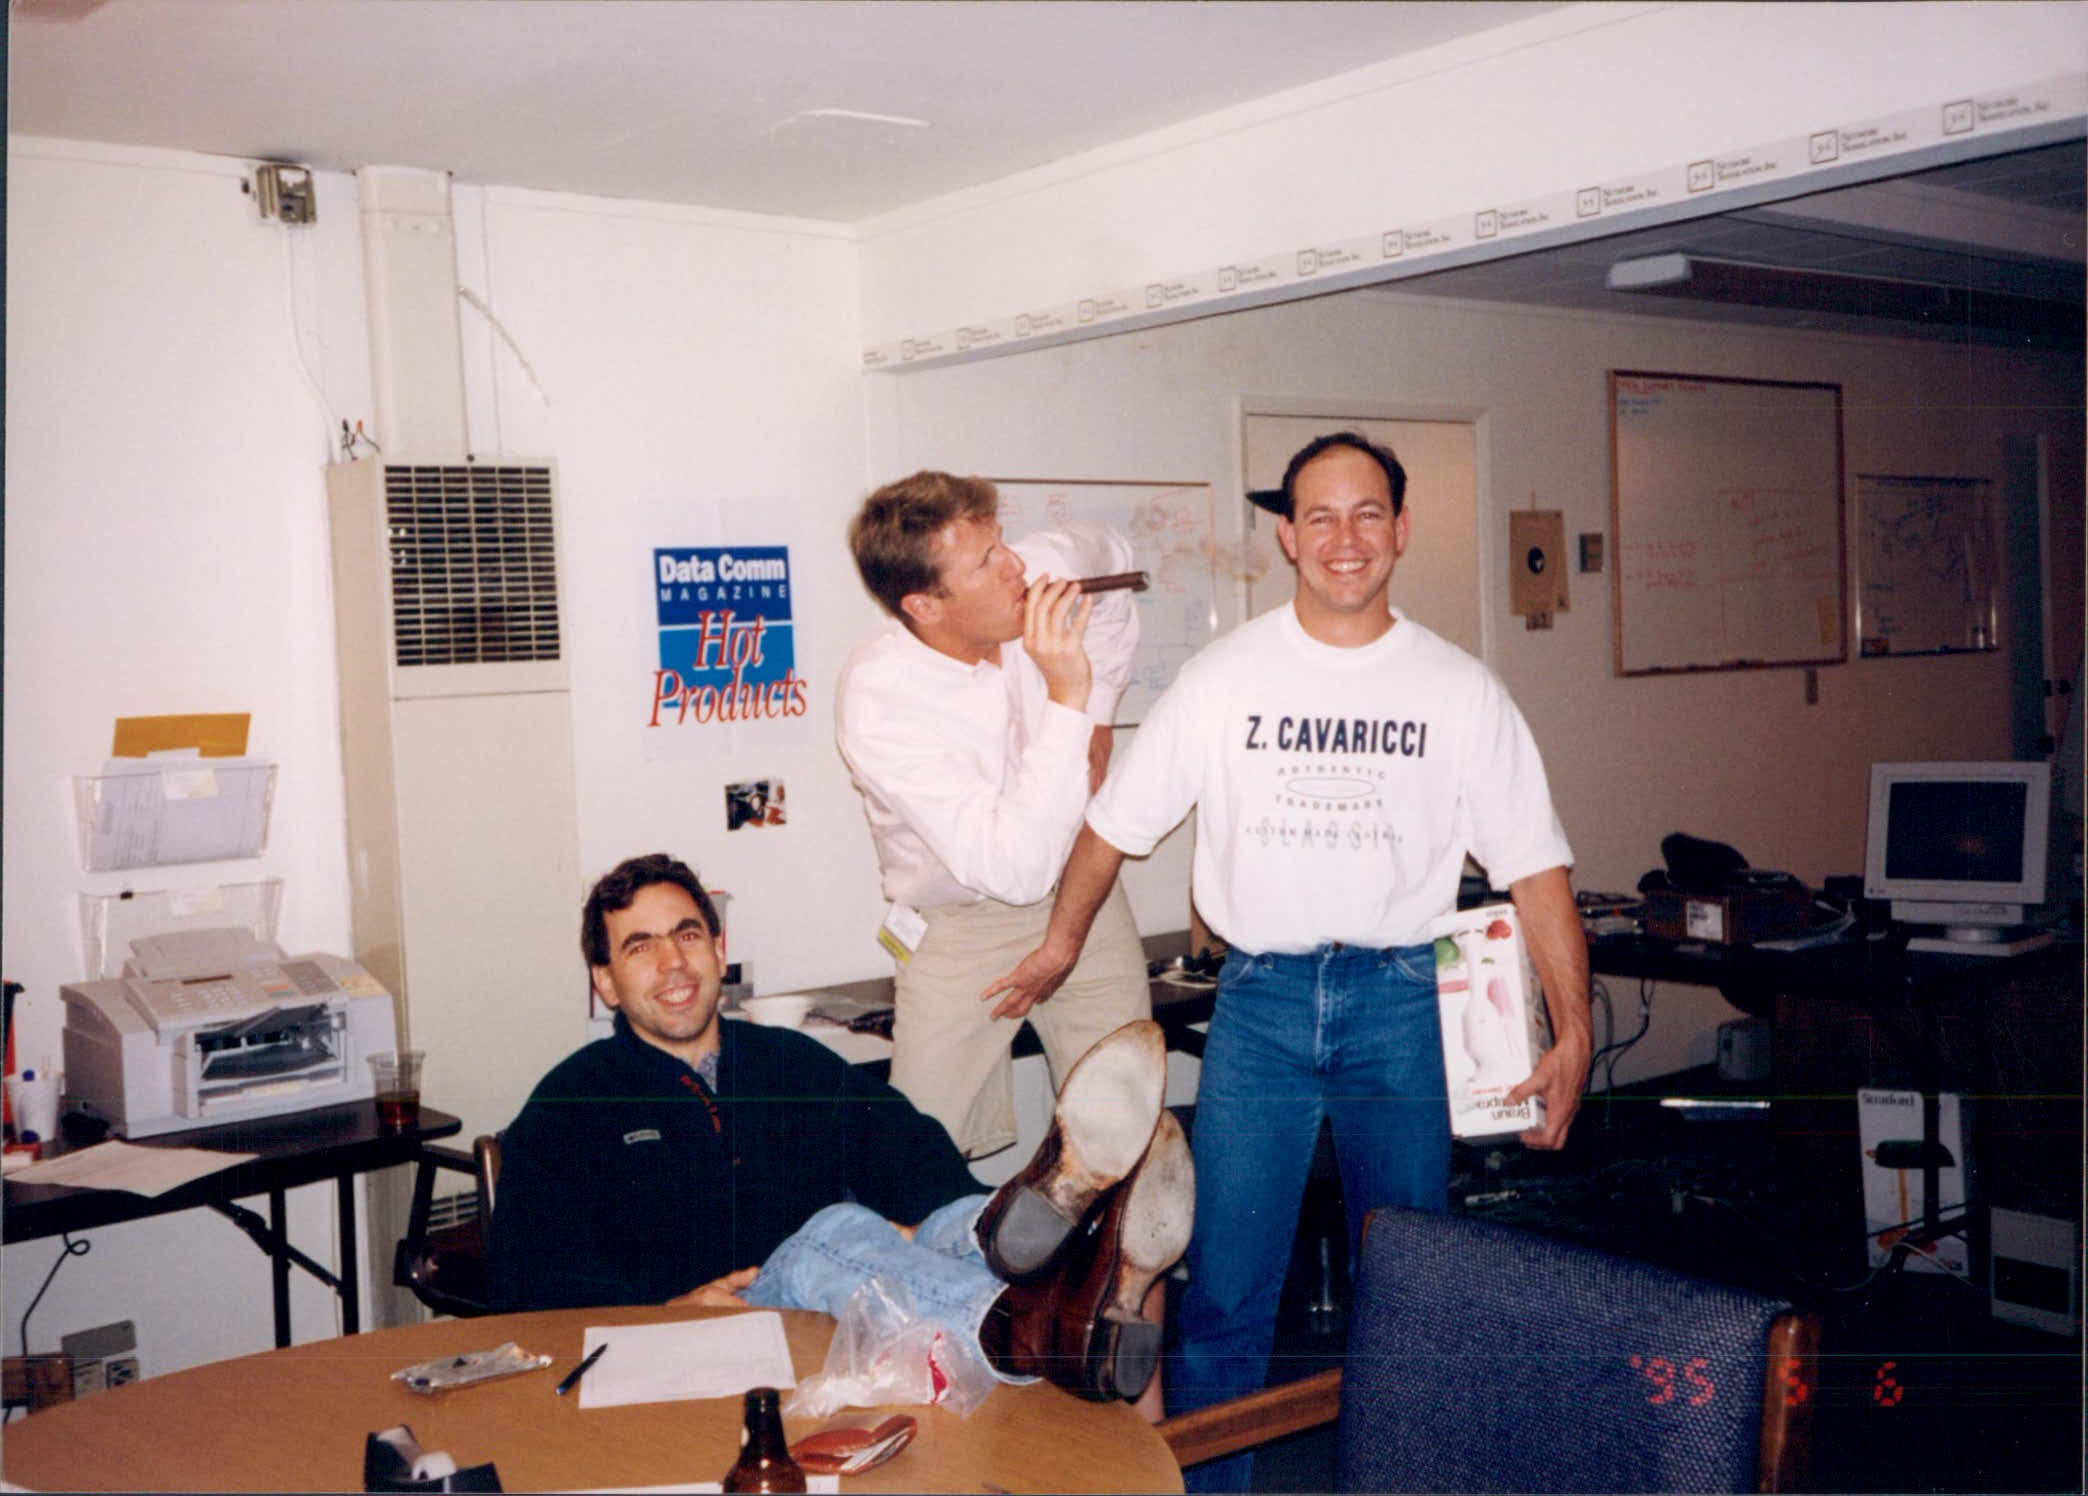 Black and White Ball night at NTI c. 1994<br />(l to r) John Mayes, Richard Clark, Tom Dwyer<br />Note Data Communications Hot Product award on wall<br /><br />Photo by un